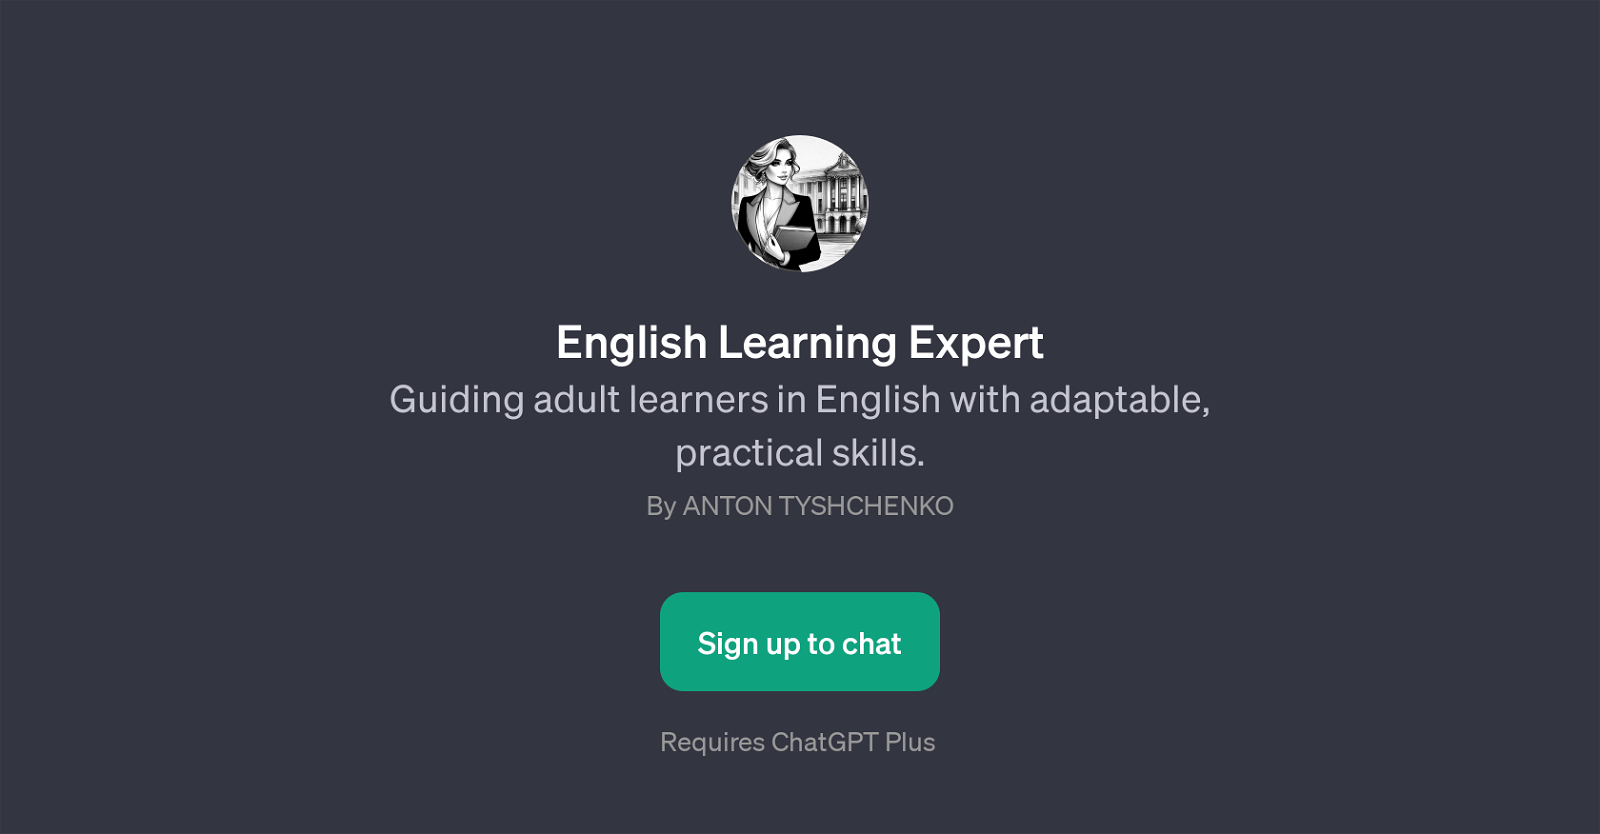 English Learning Expert website